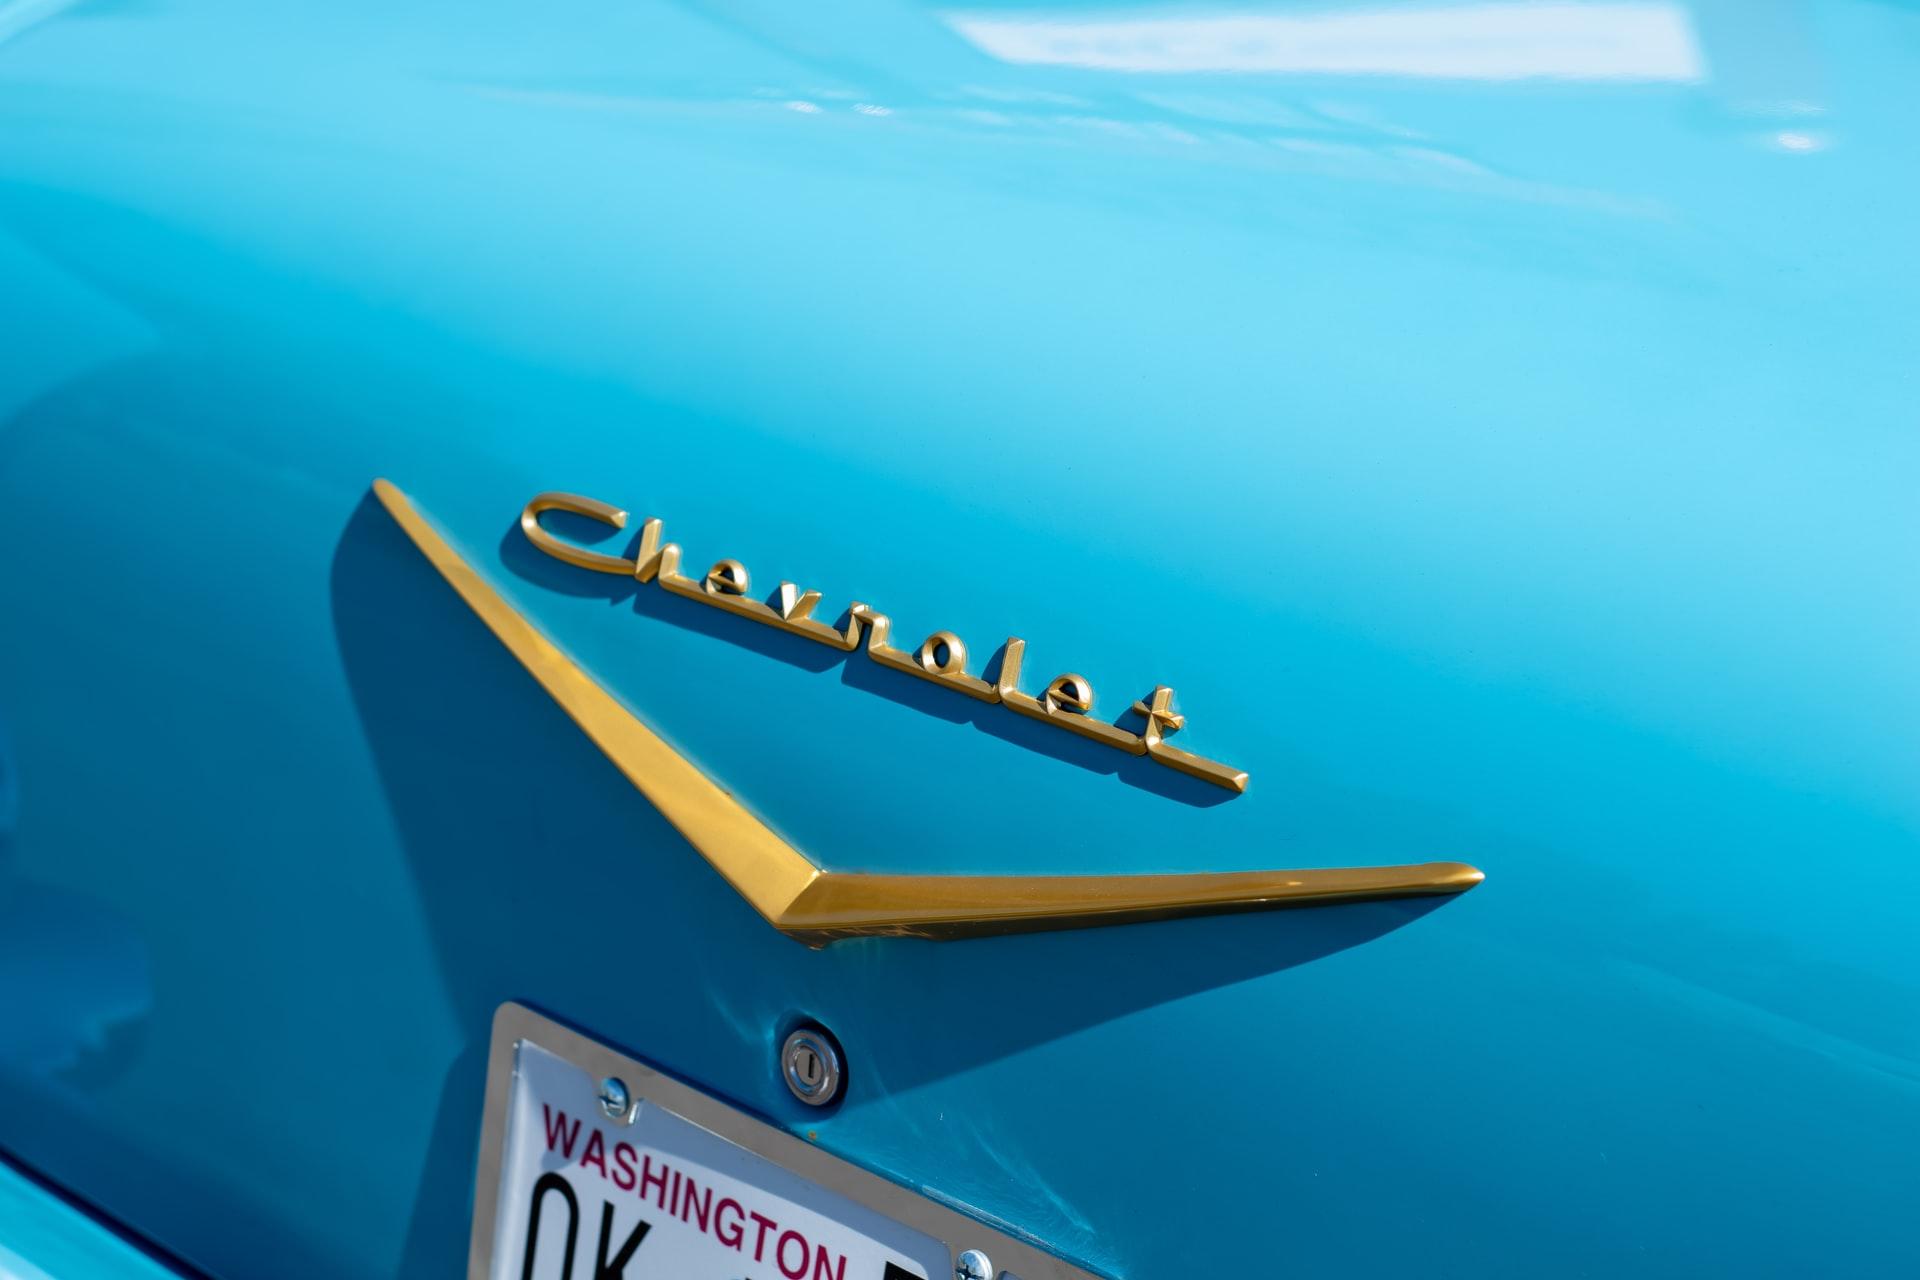 The Chevy Celebrity was introduced in 1982.